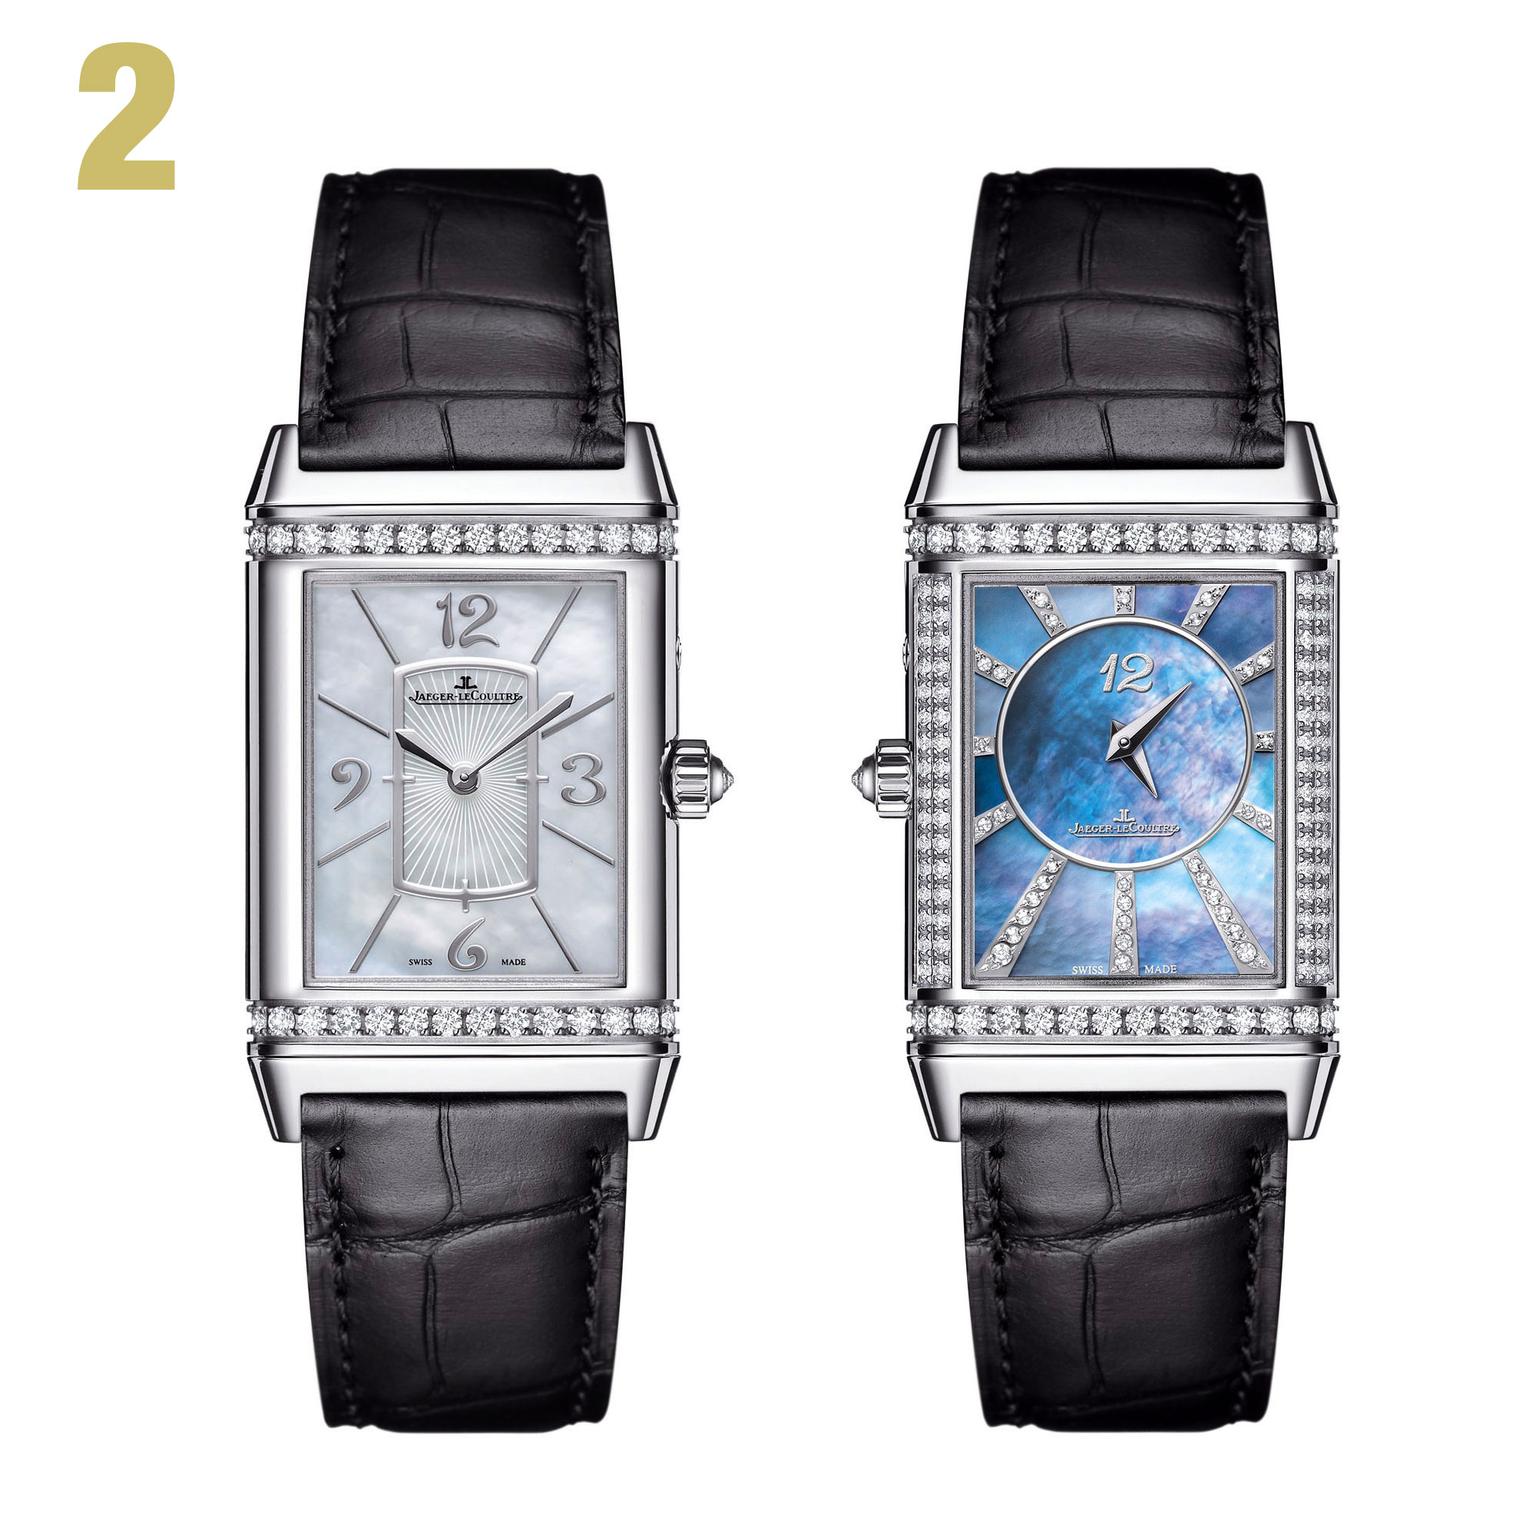 2 Jaeger-LeCoultre Reverso Lady Ultra Thin Duetto Duo white gold watch